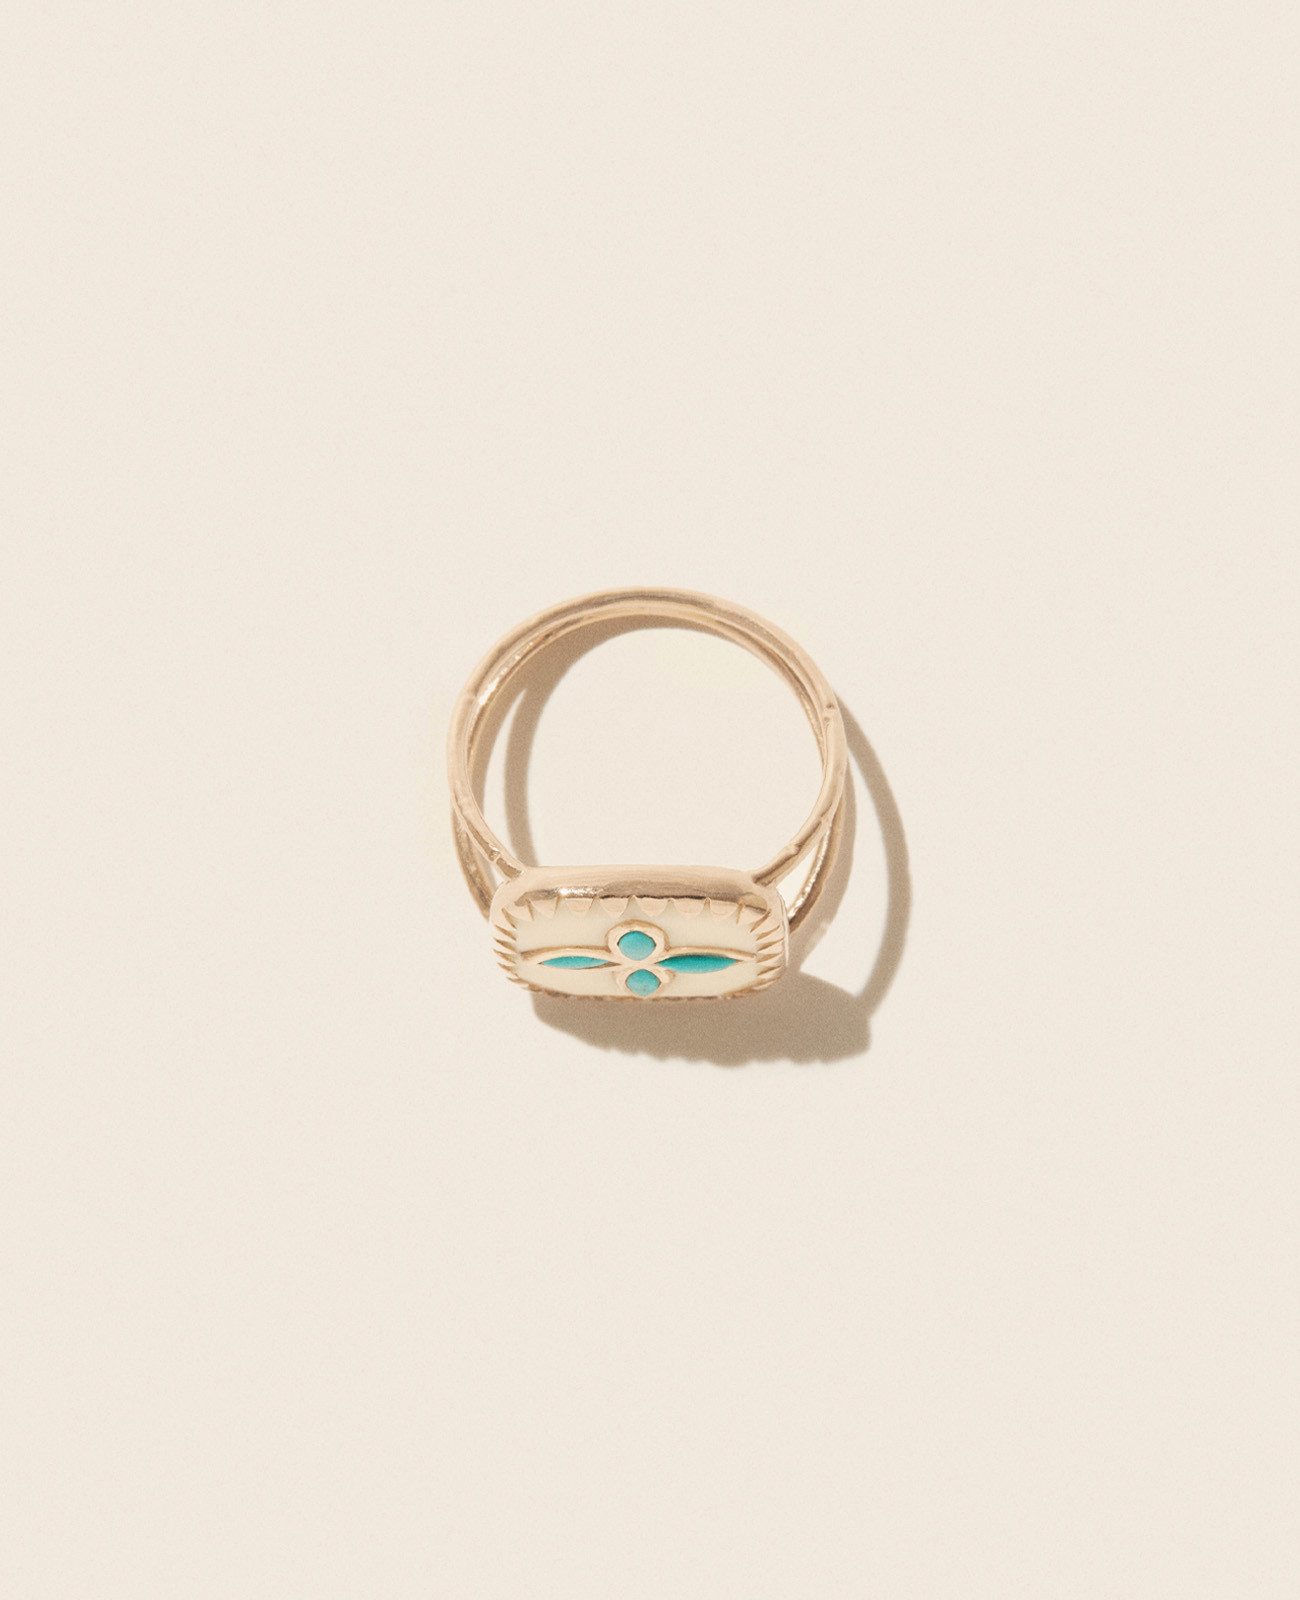 BOWIE N°2 WHITE TURQUOISE ring pascale monvoisin jewelry paris